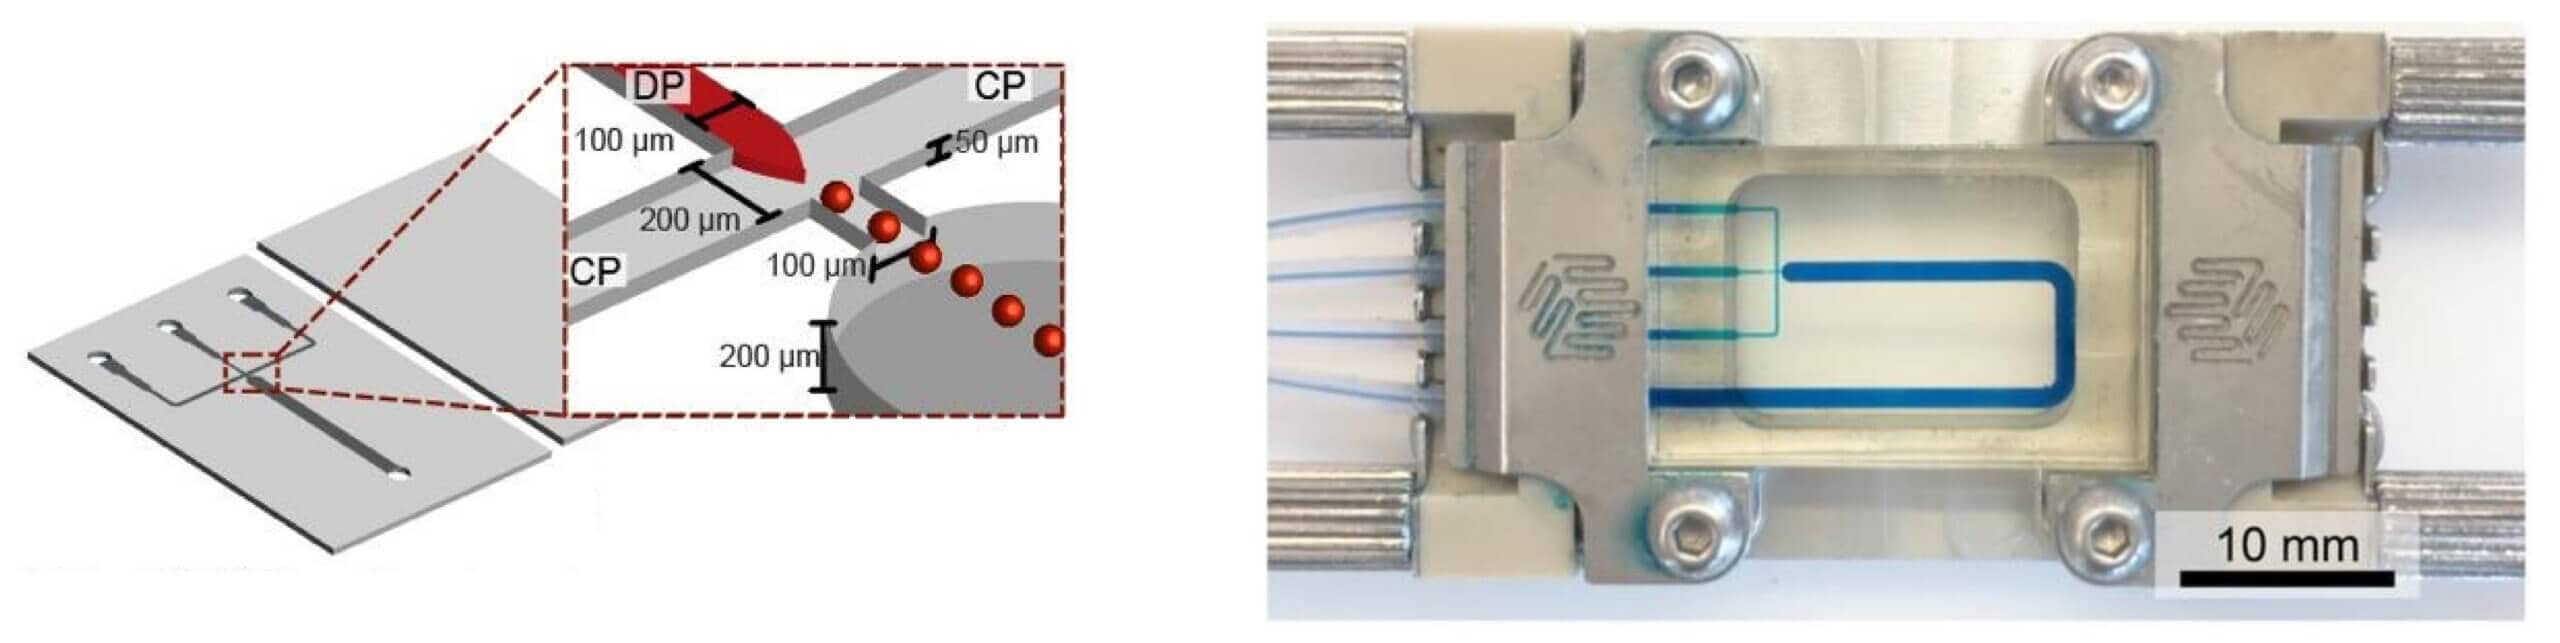 Chemically resistant thiol ene flow focusing chip scaled